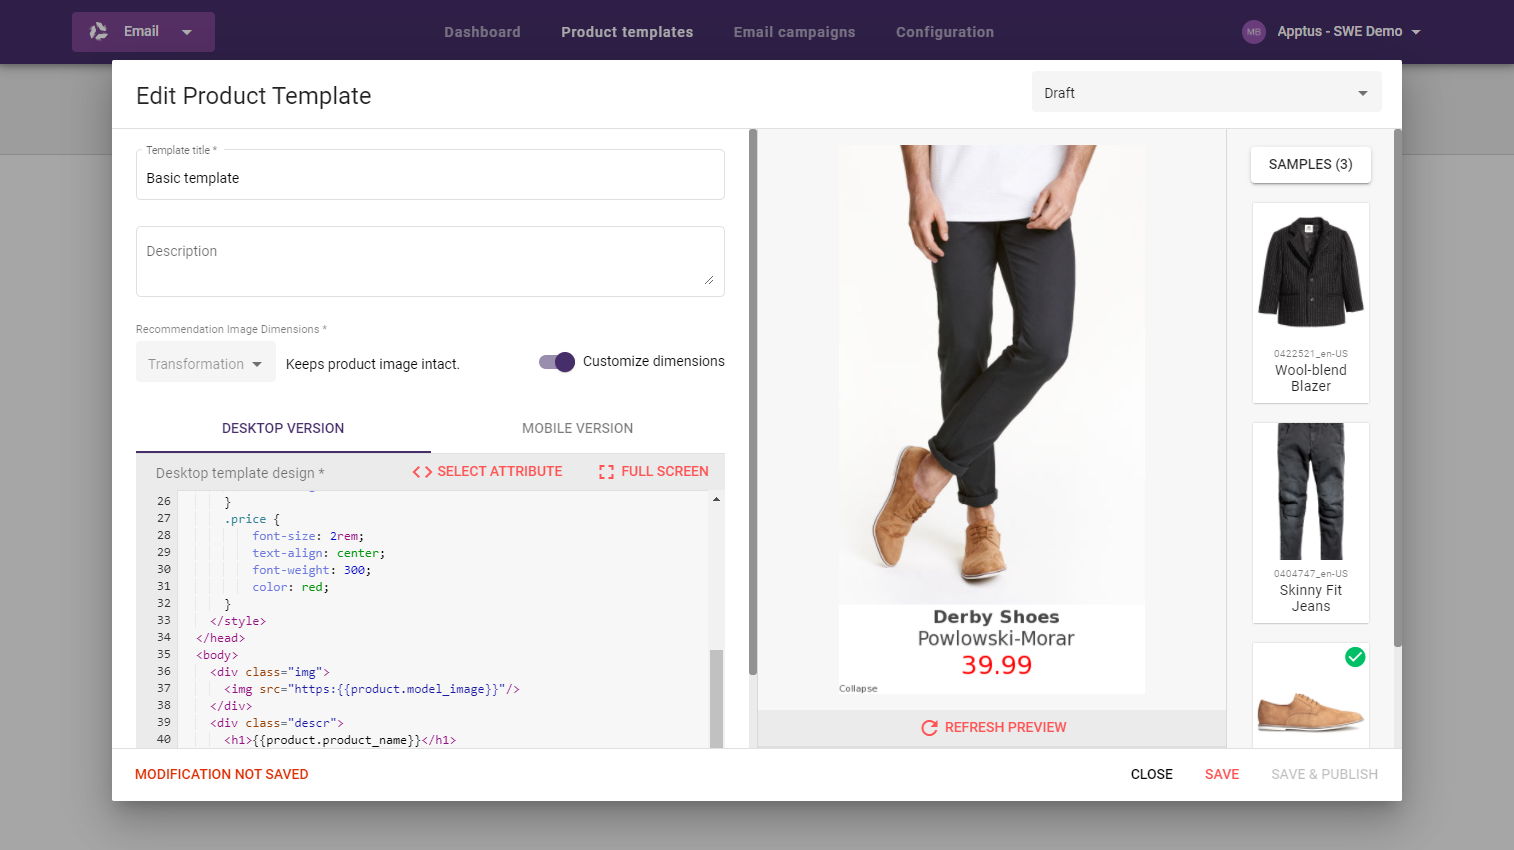 Email Recommendations - Product template